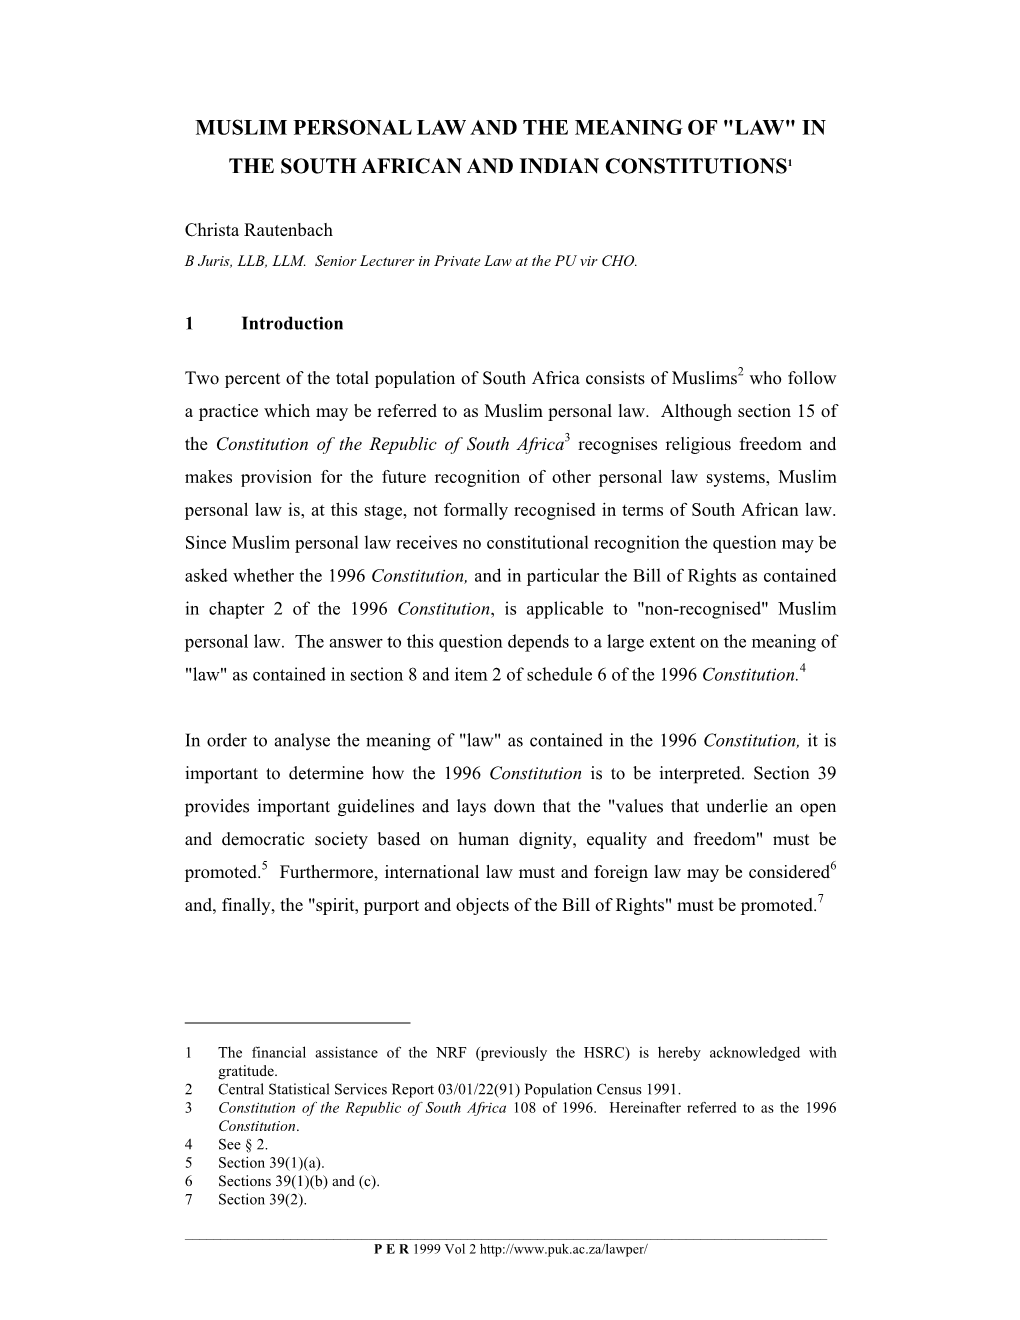 Muslim Personal Law and the Meaning of "Law" in the South African and Indian Constitutions1